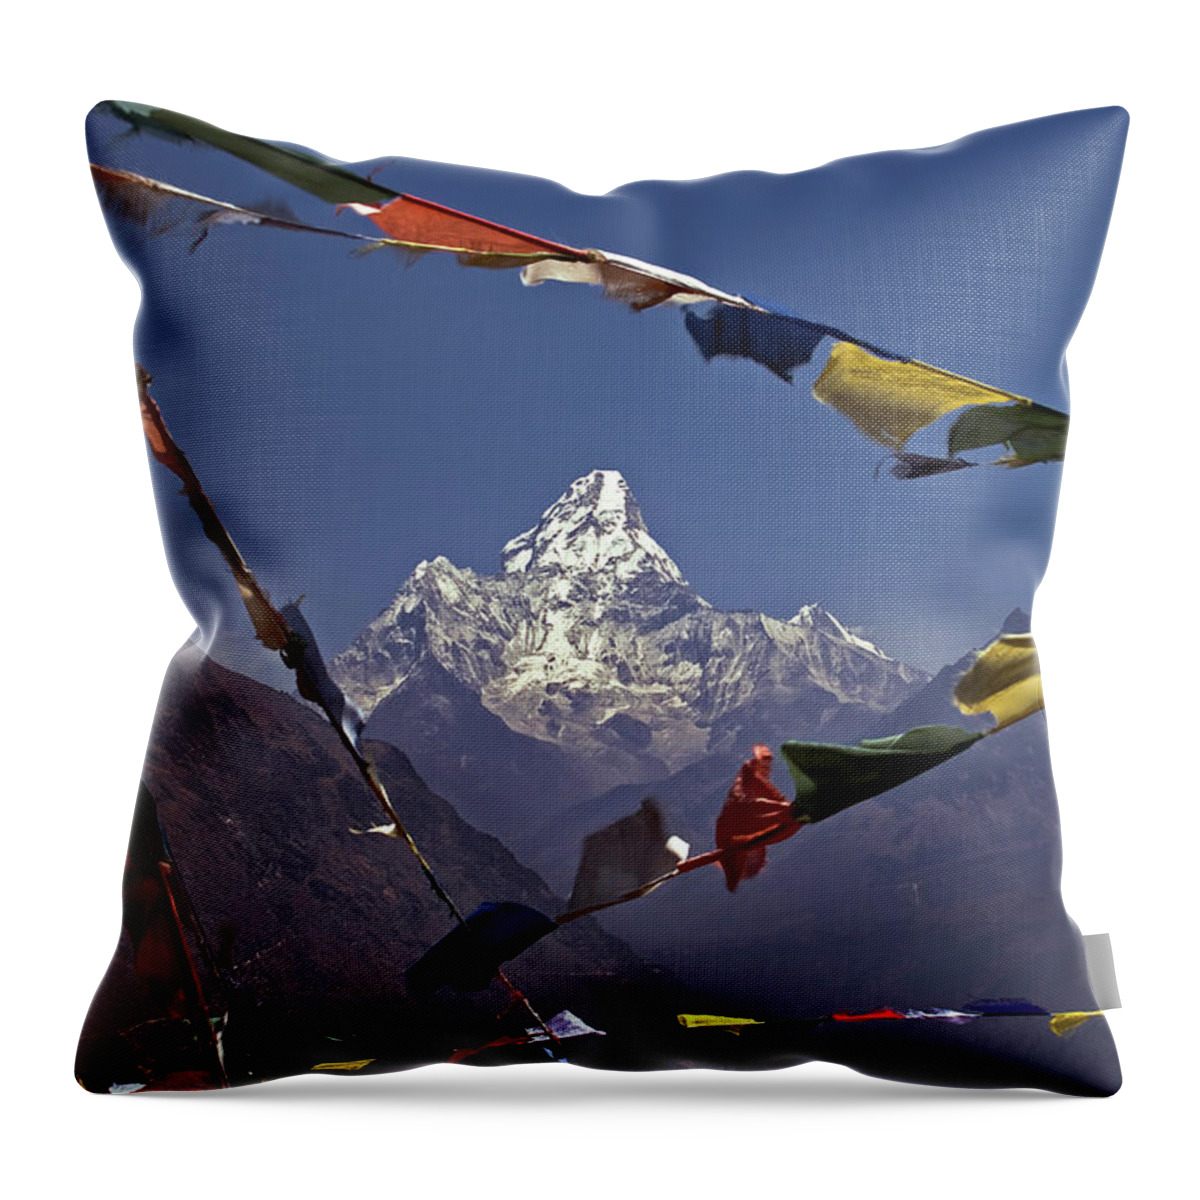 Tranquility Throw Pillow featuring the photograph Mong & Ama Dablam by Foto Pietro Columba